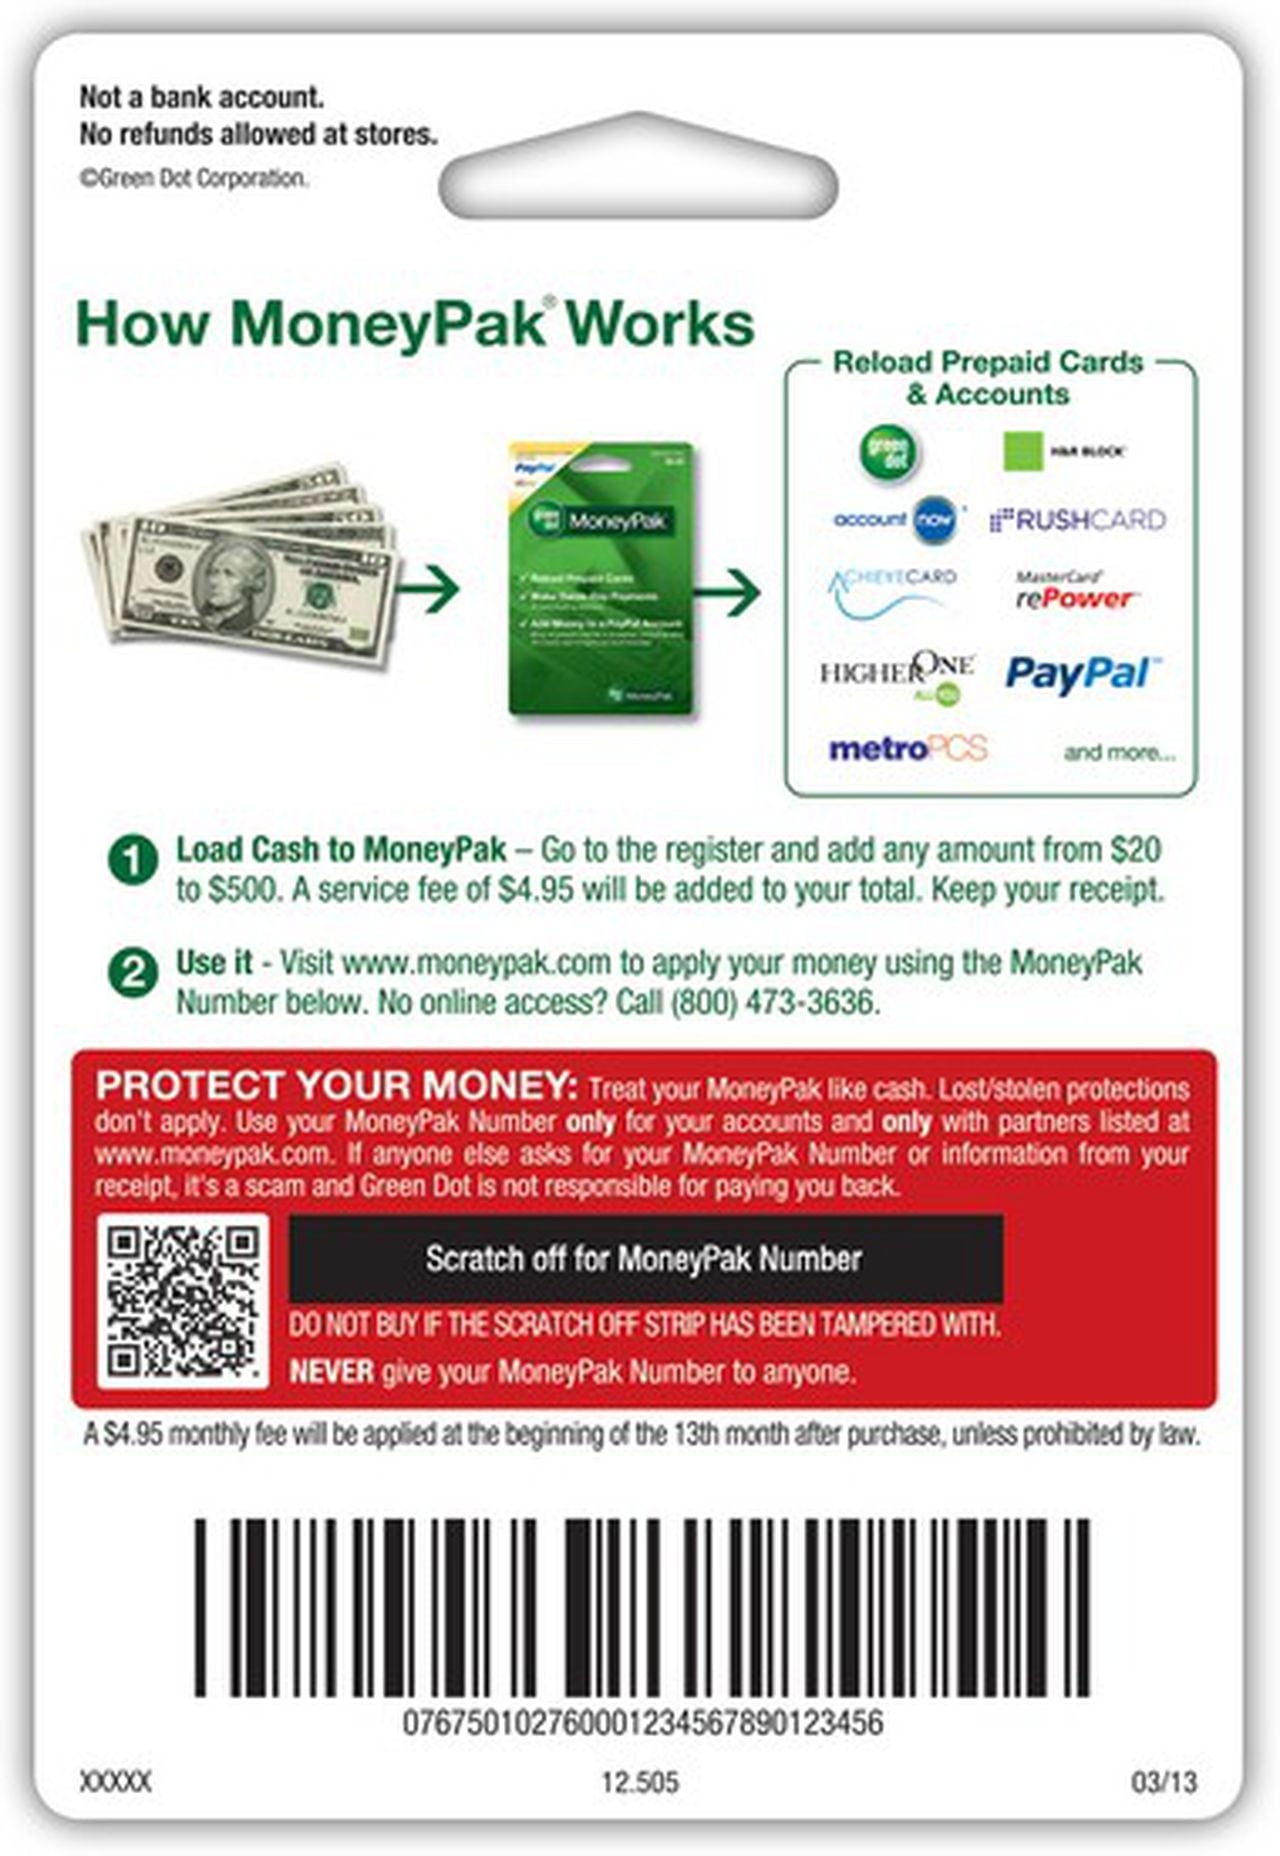 What is a MoneyPak?